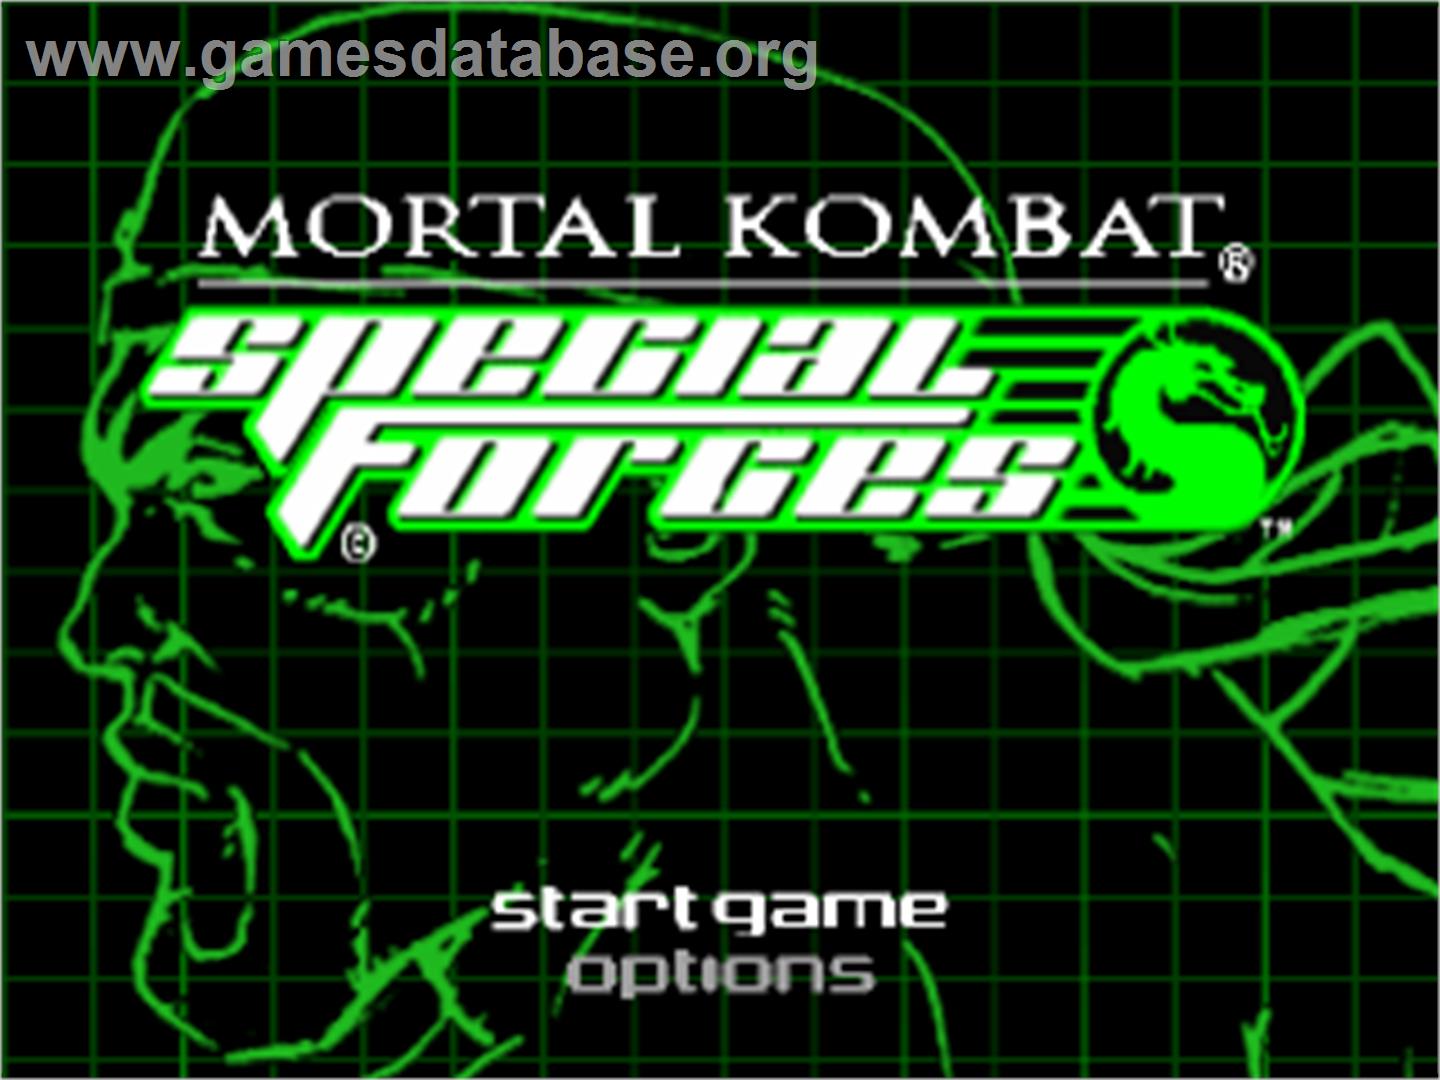 Mortal Kombat: Special Forces - Sony Playstation - Artwork - Title Screen